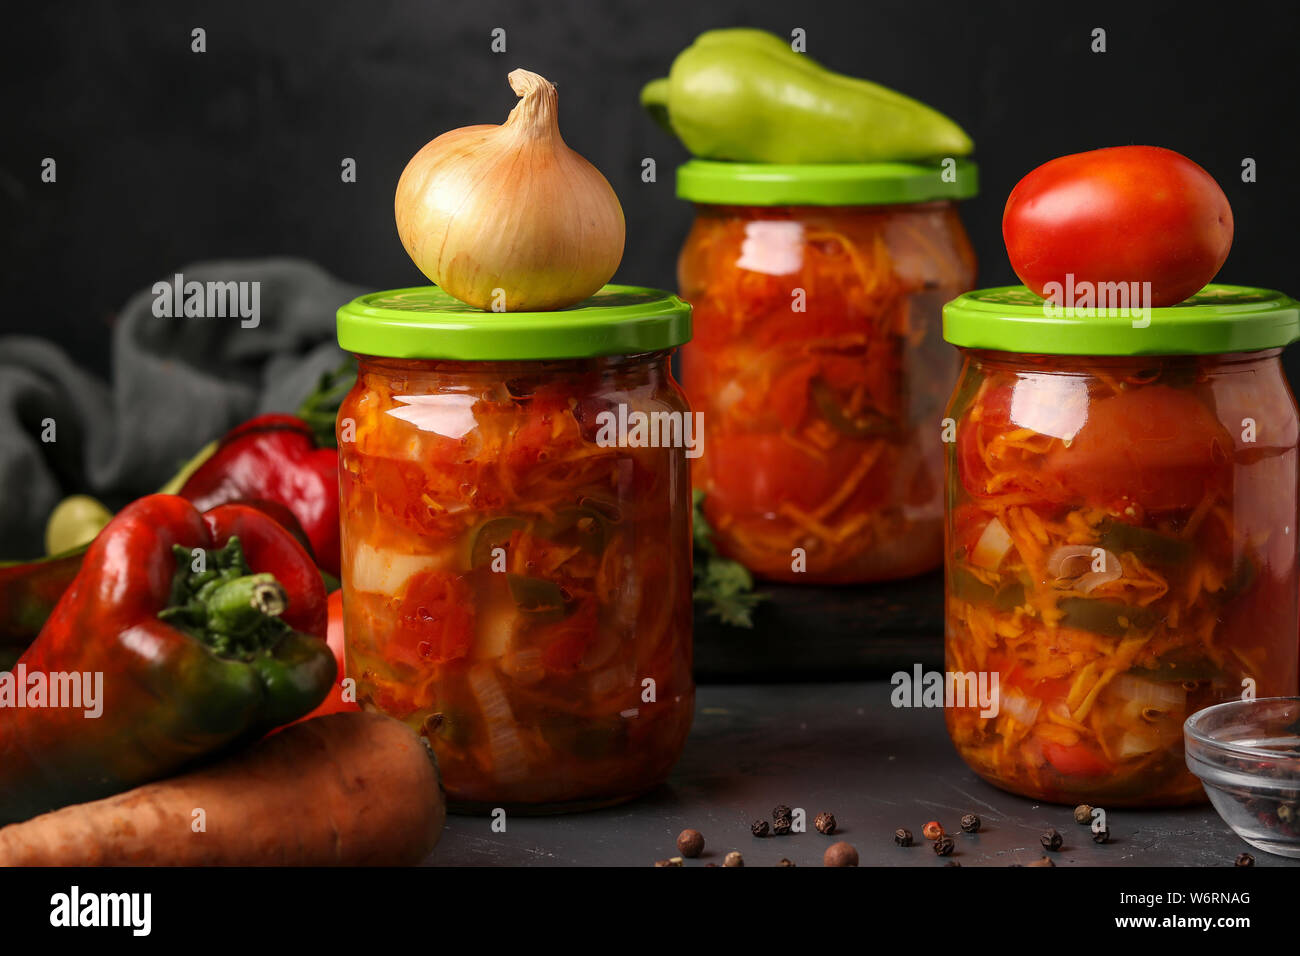 Vegetable salad in jars for the winter of tomatoes, carrots, onions and peppers, horizontal arrangement Stock Photo